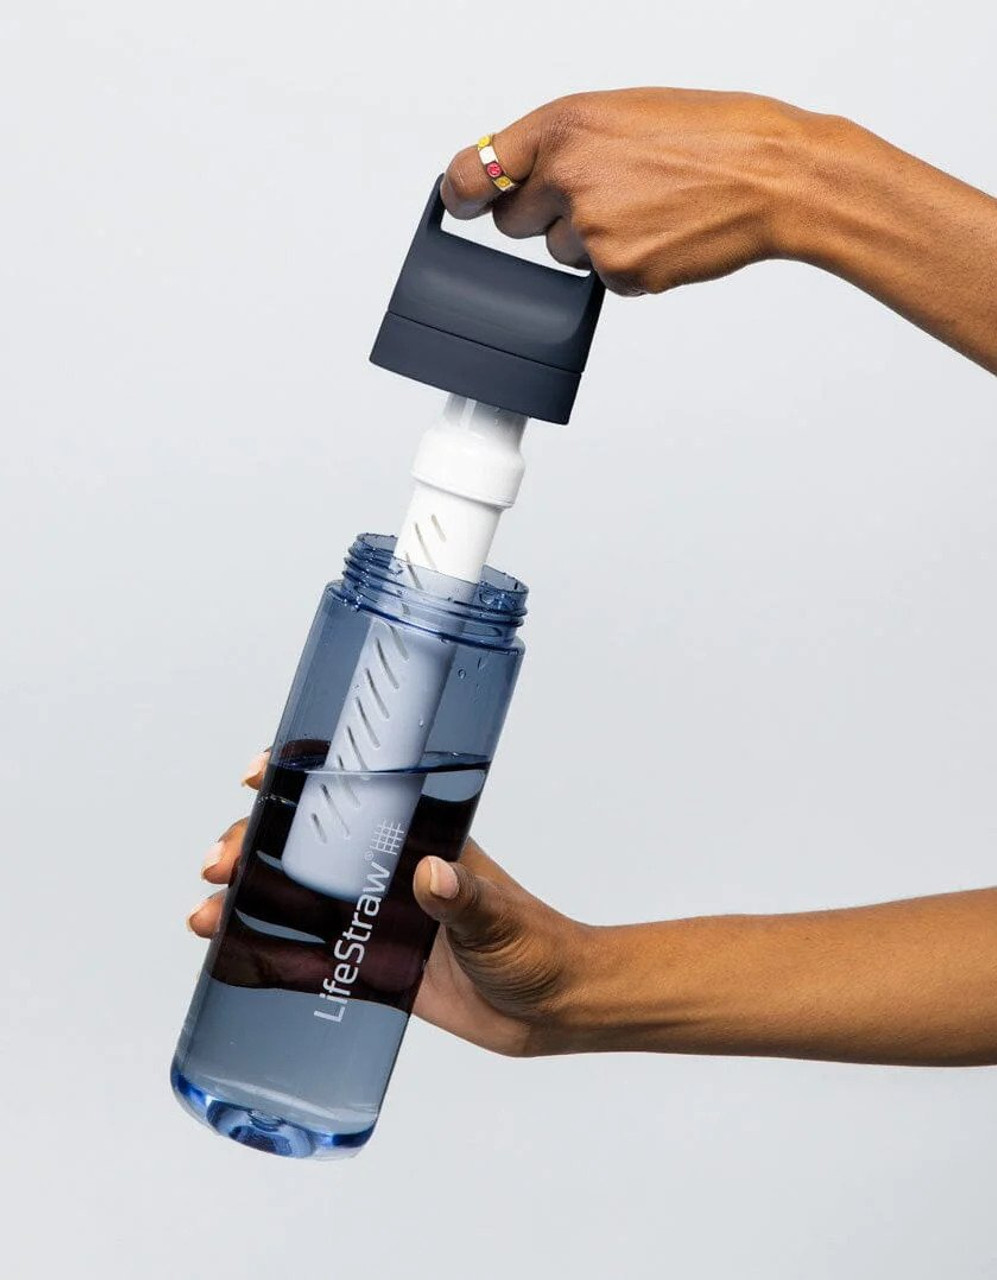 https://cdn11.bigcommerce.com/s-ovptlwt64t/images/stencil/1280x1280/products/857/4029/LIFESTRAW-GO-SERIES-22OZ-2__15574.1683079488.jpg?c=1?imbypass=on